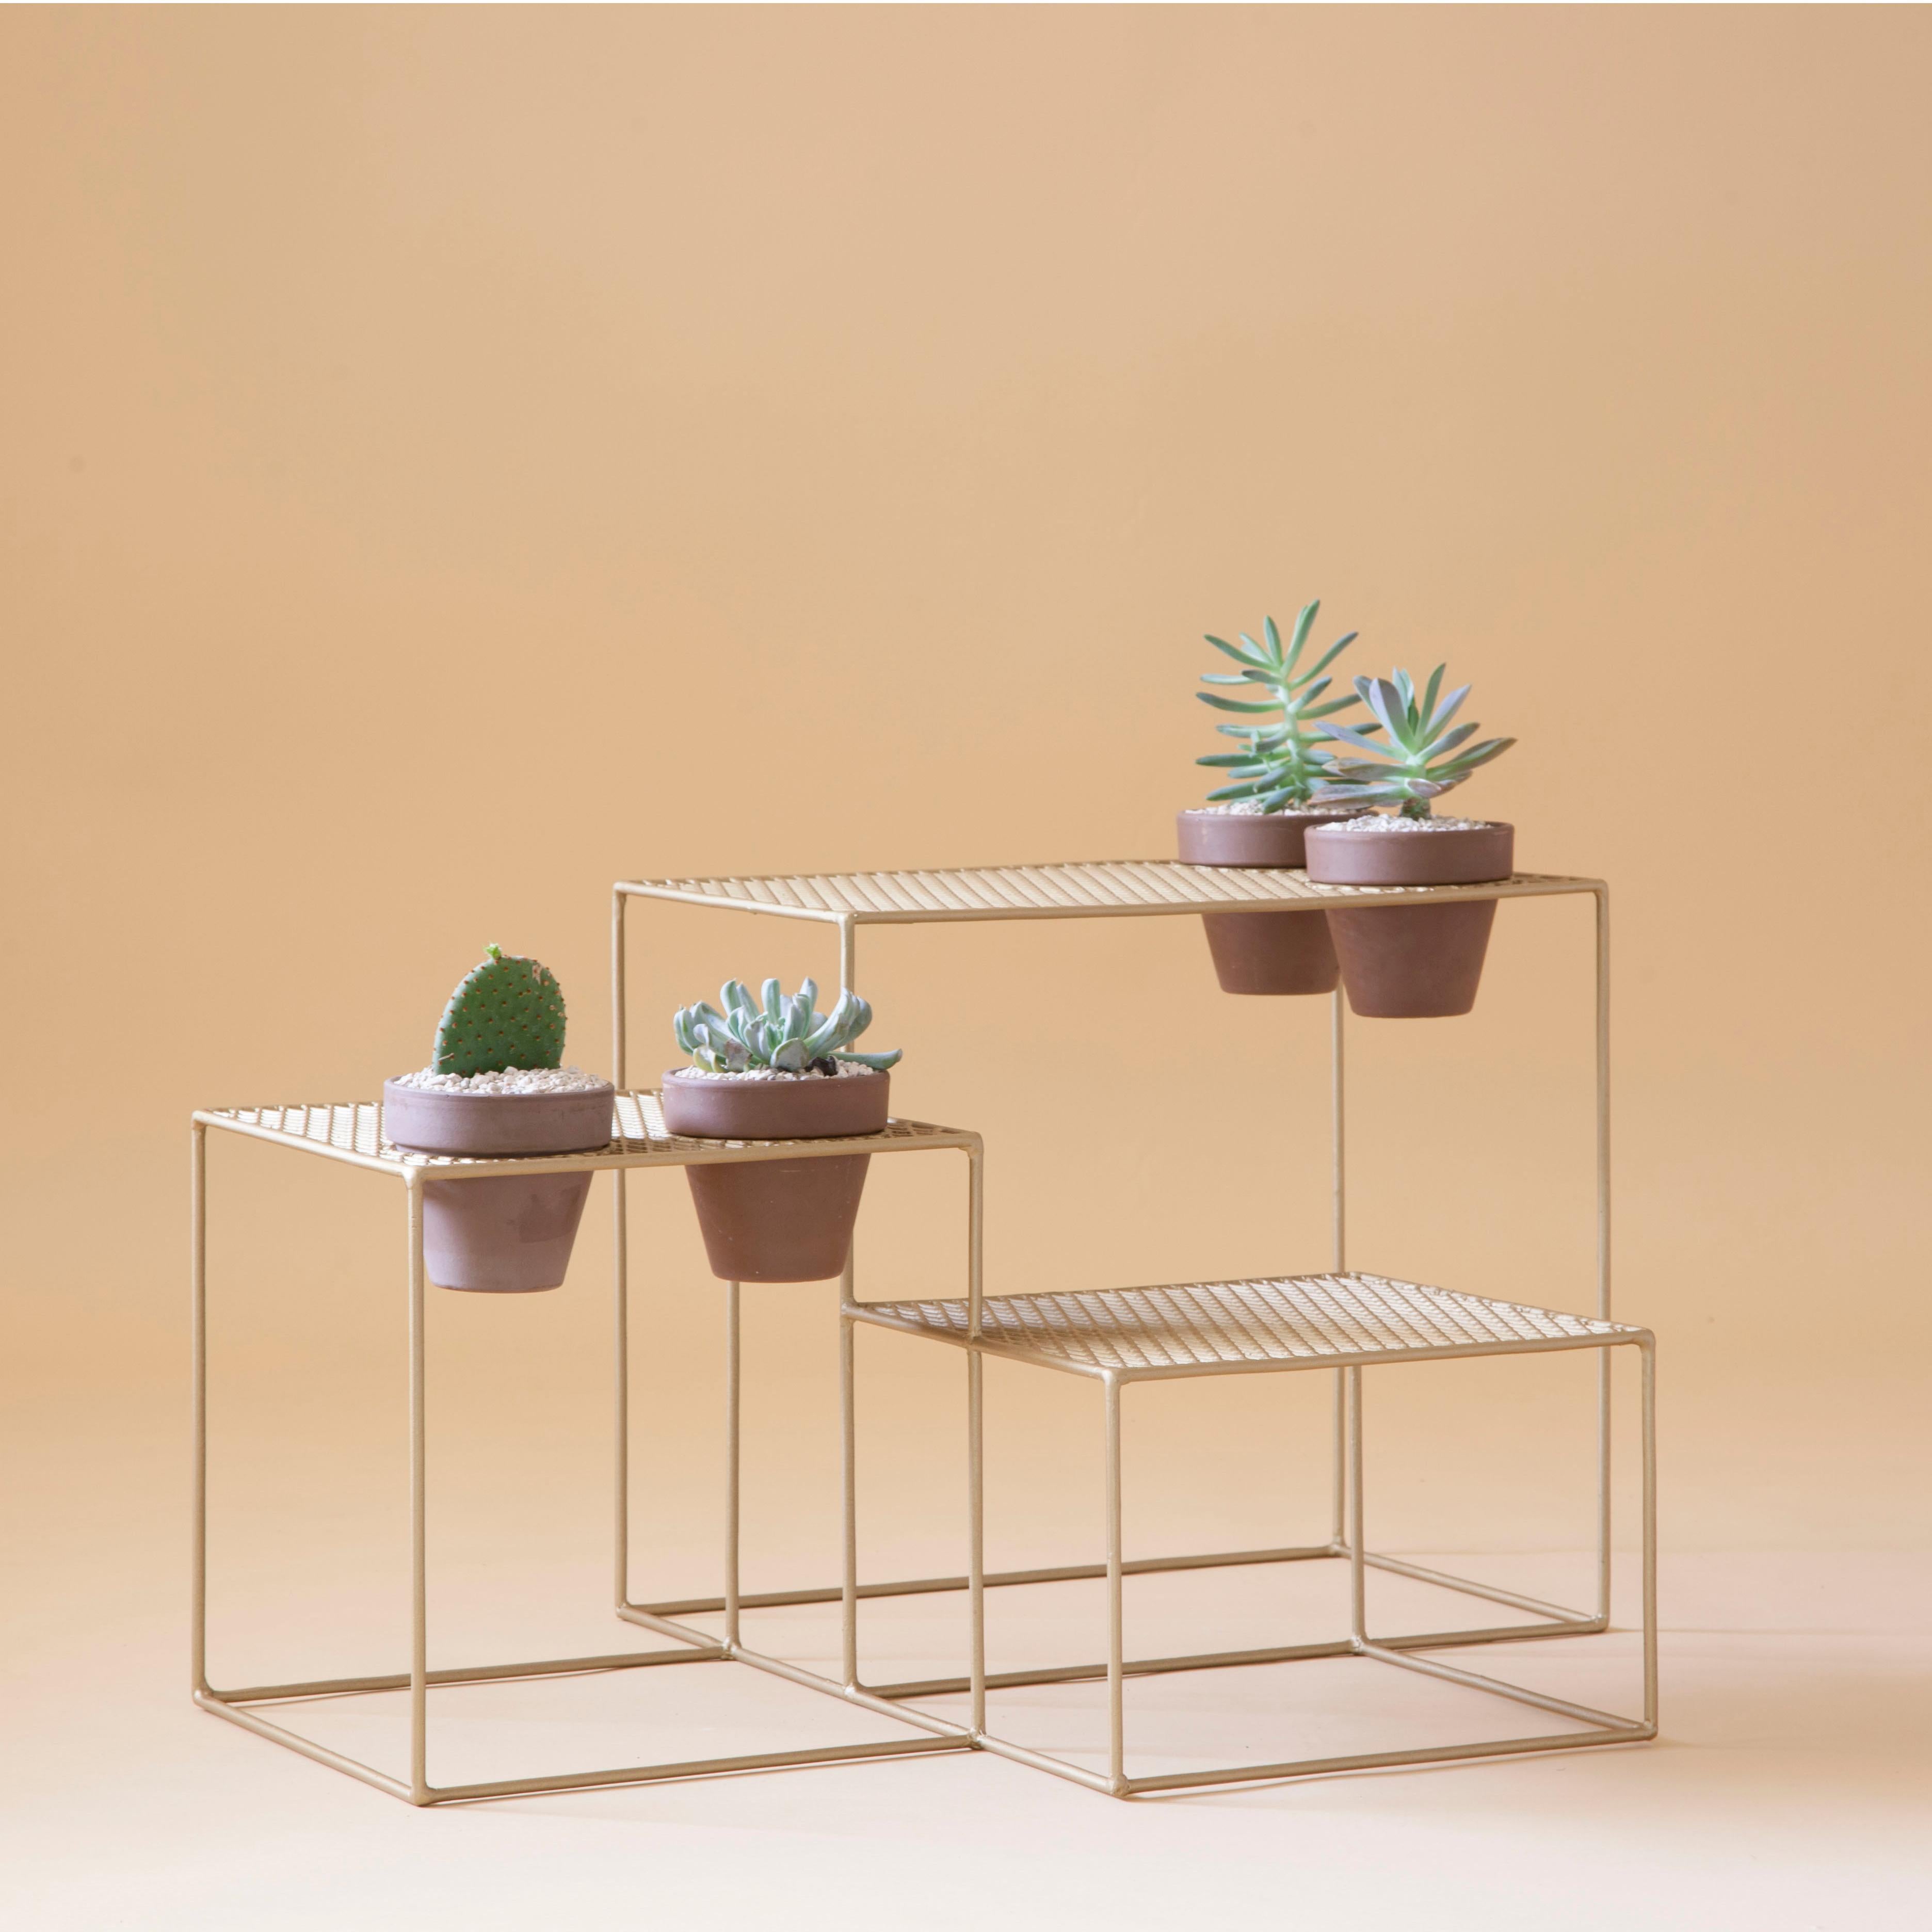 Aurea plant stand 4 by Sofia Alvarado
Limited edition 1 of 10 (one in stock)
Materials: Metal & woods / golden, white or black.
Dimensions: 40cm (H) x 75cm (W) x 60cm (D).

FI is an ornamental artist who embodies the creative Revelation of the